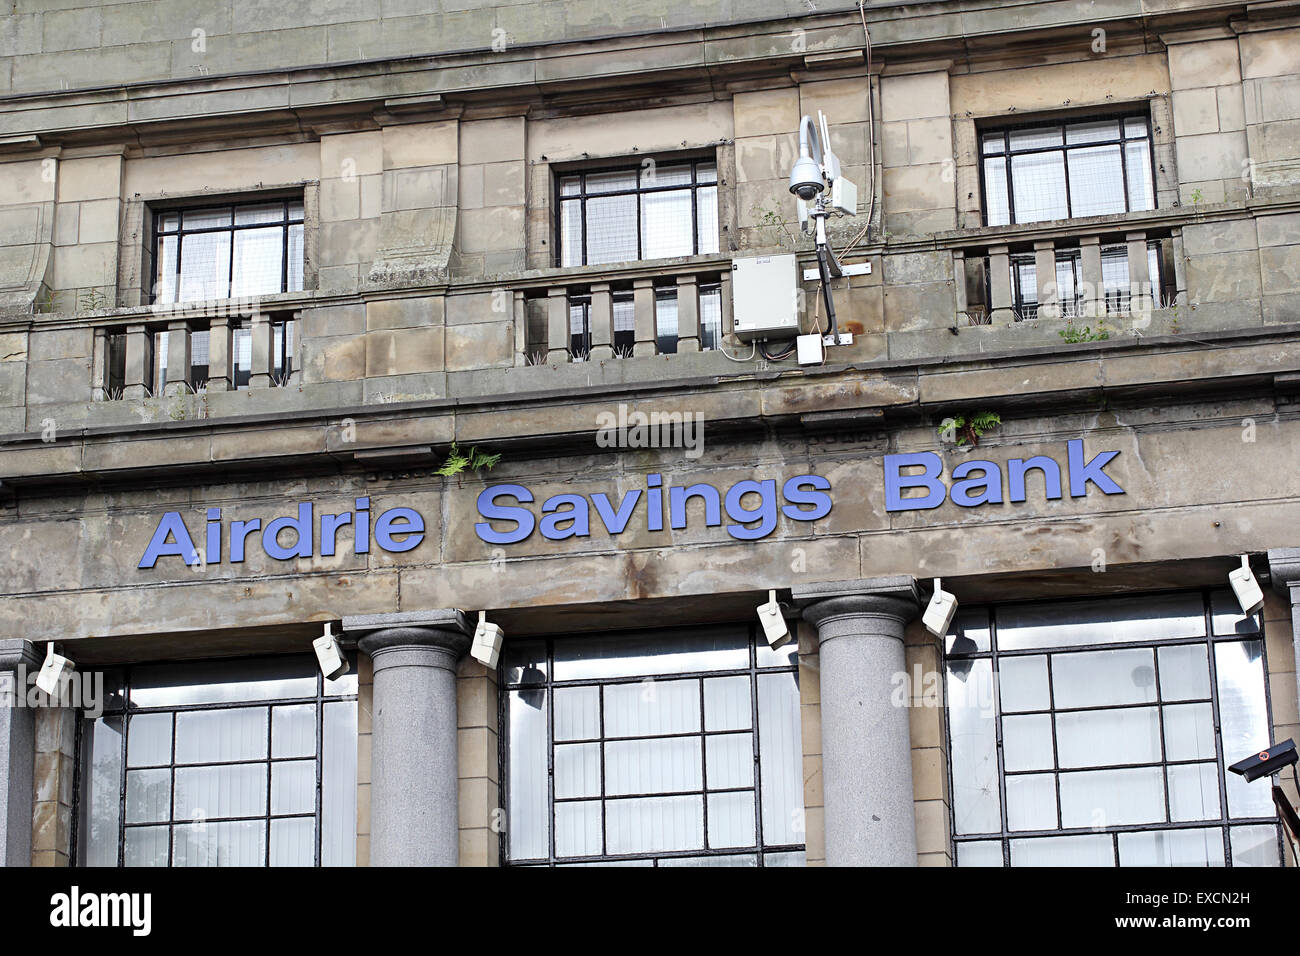 Airdrie Savings Bank, Airdrie, North Lanarkshire, Scotland Stock Photo